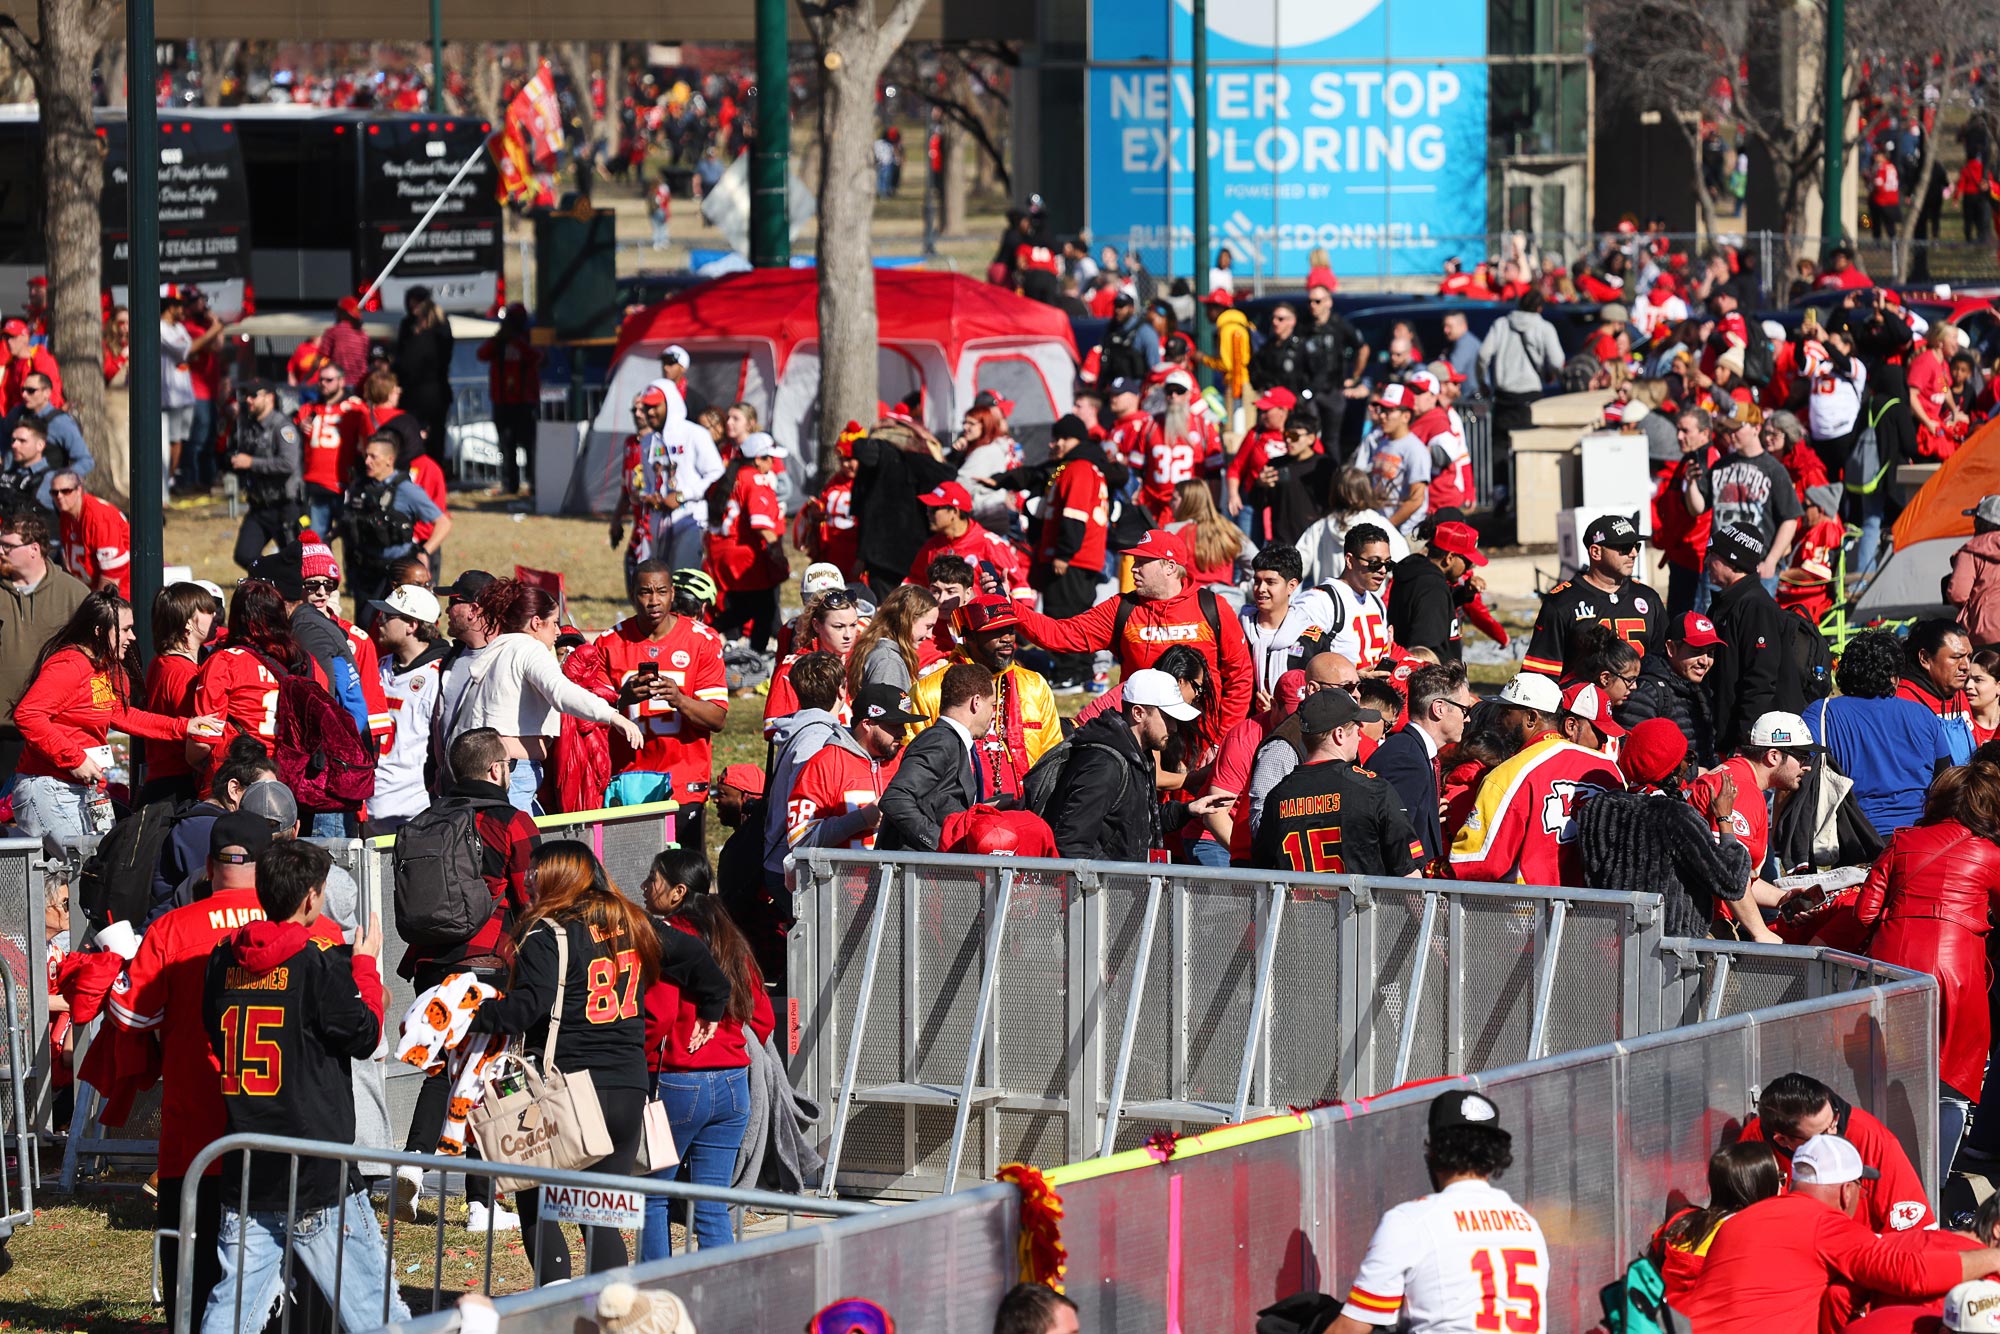 What We Know About the Kansas City Chiefs Super Bowl Parade Shooting So Far